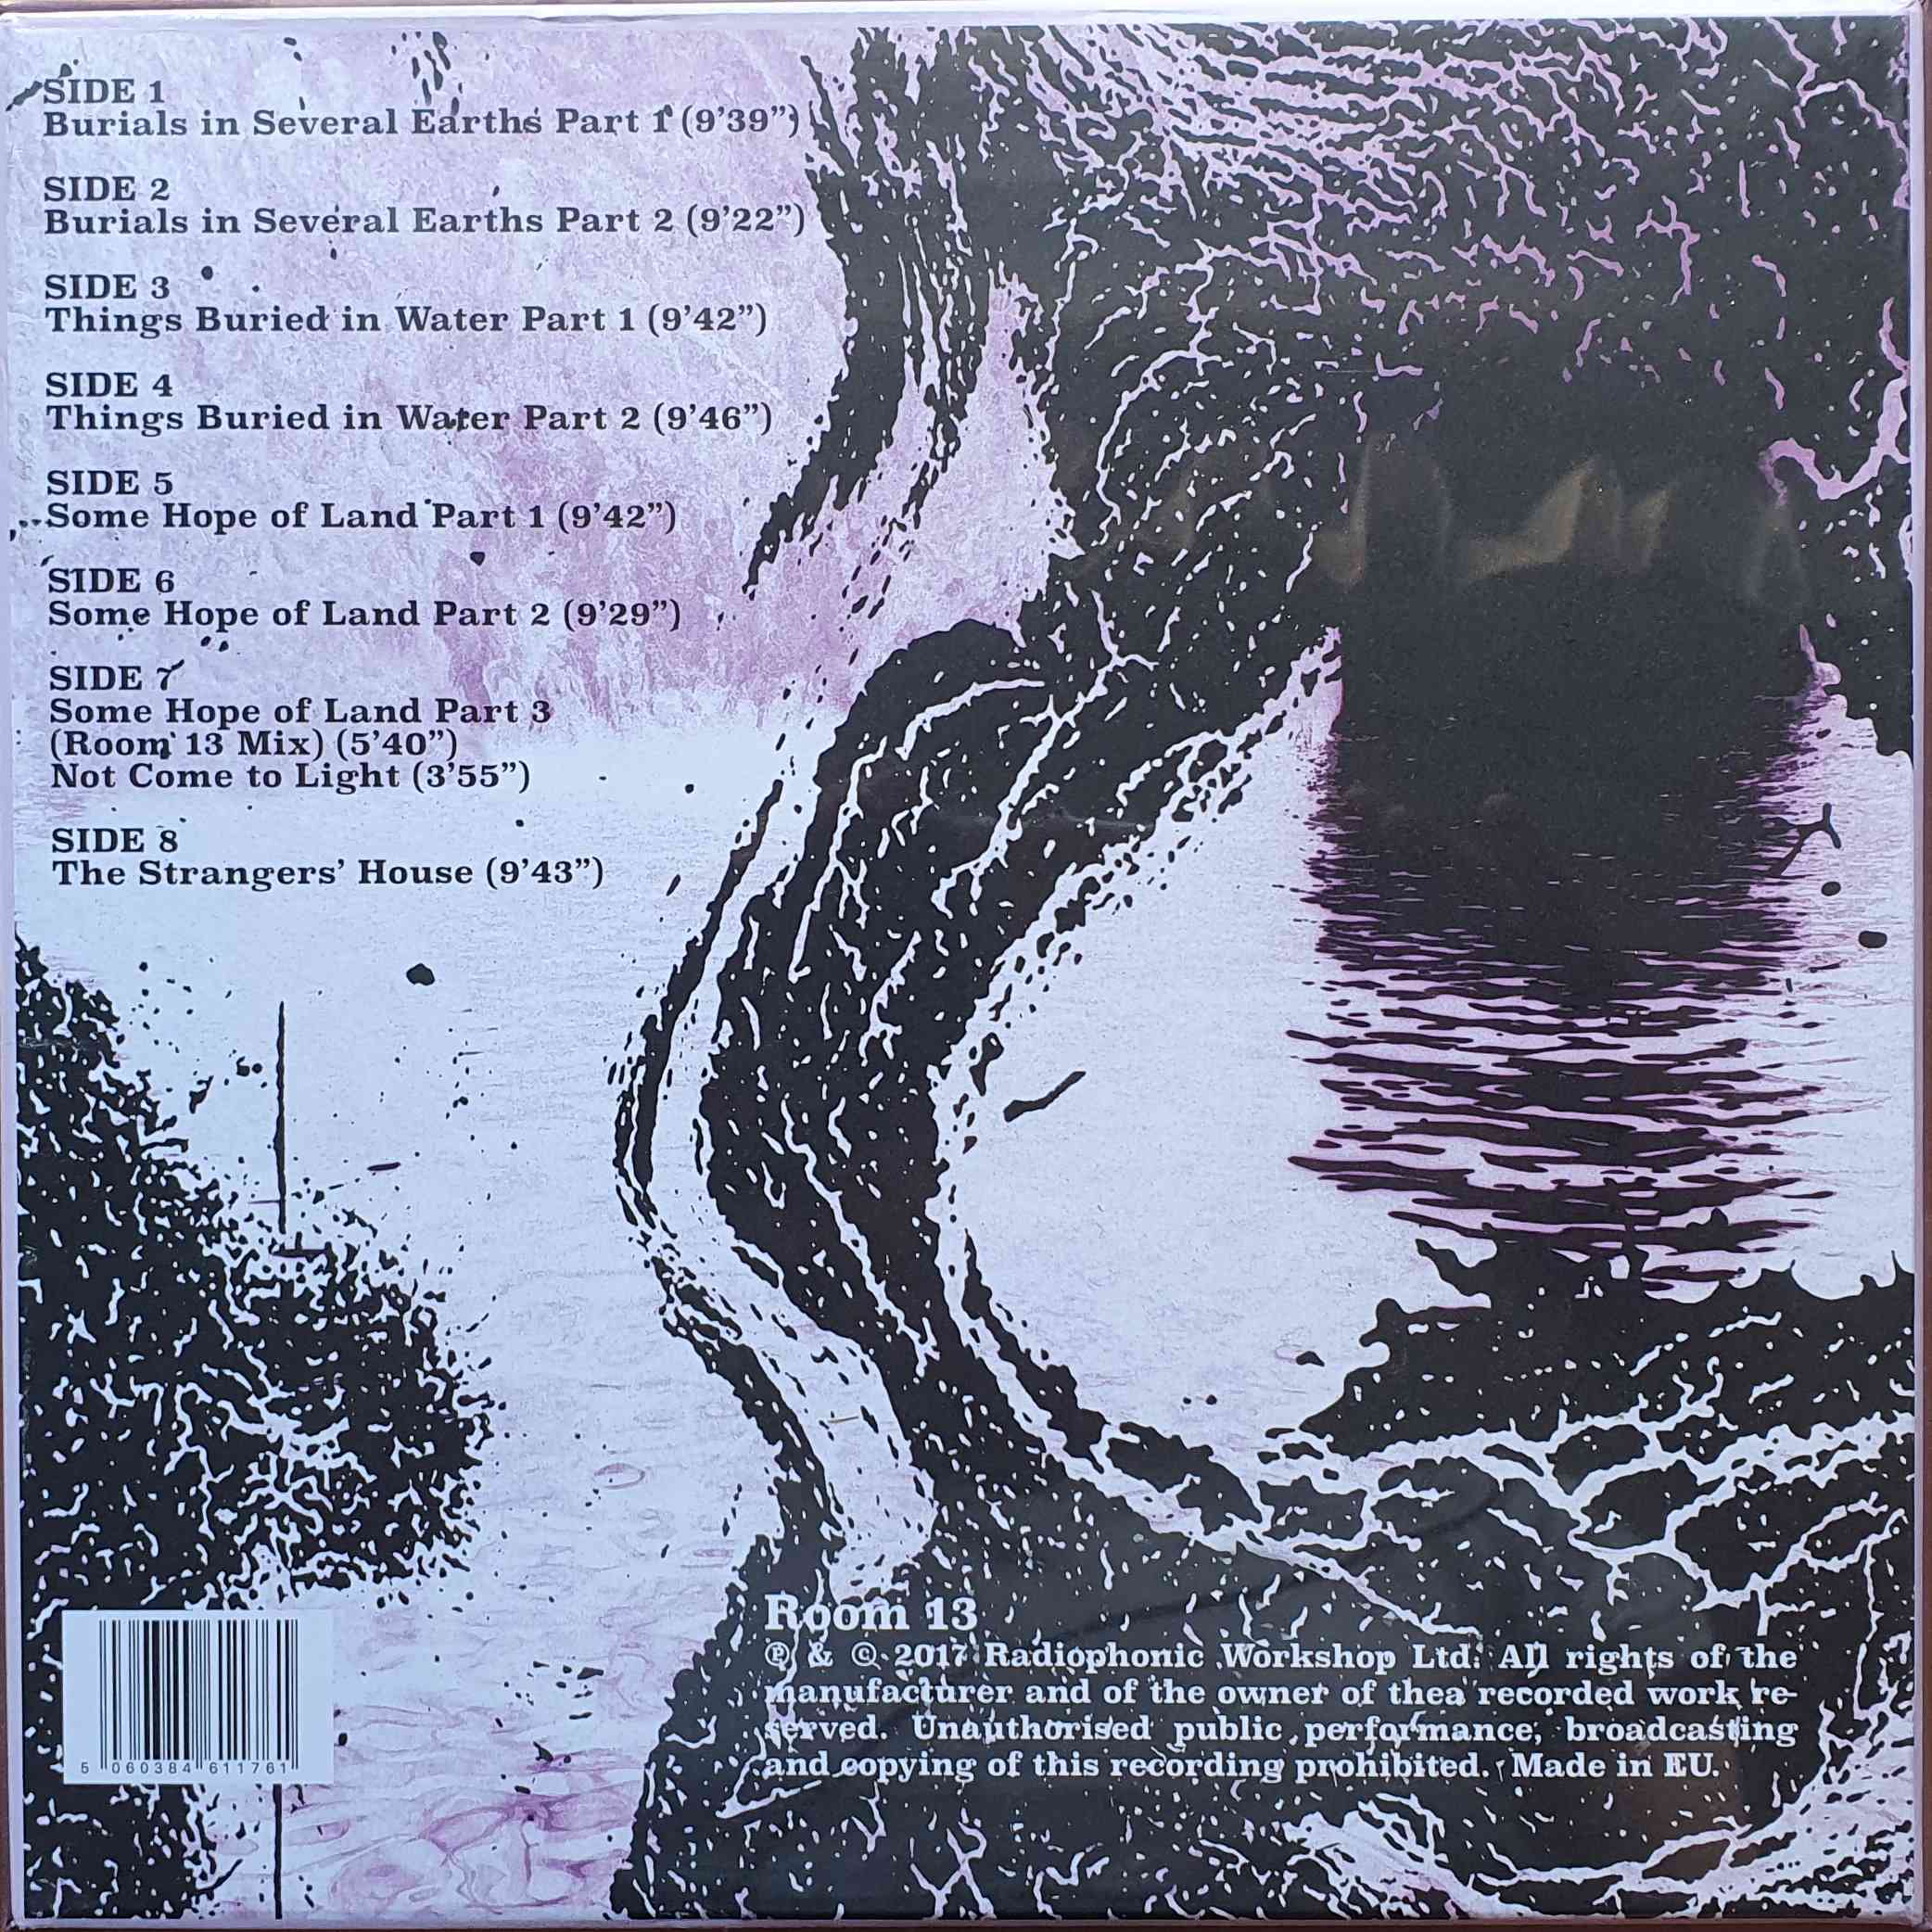 Back cover of RWSLP 001